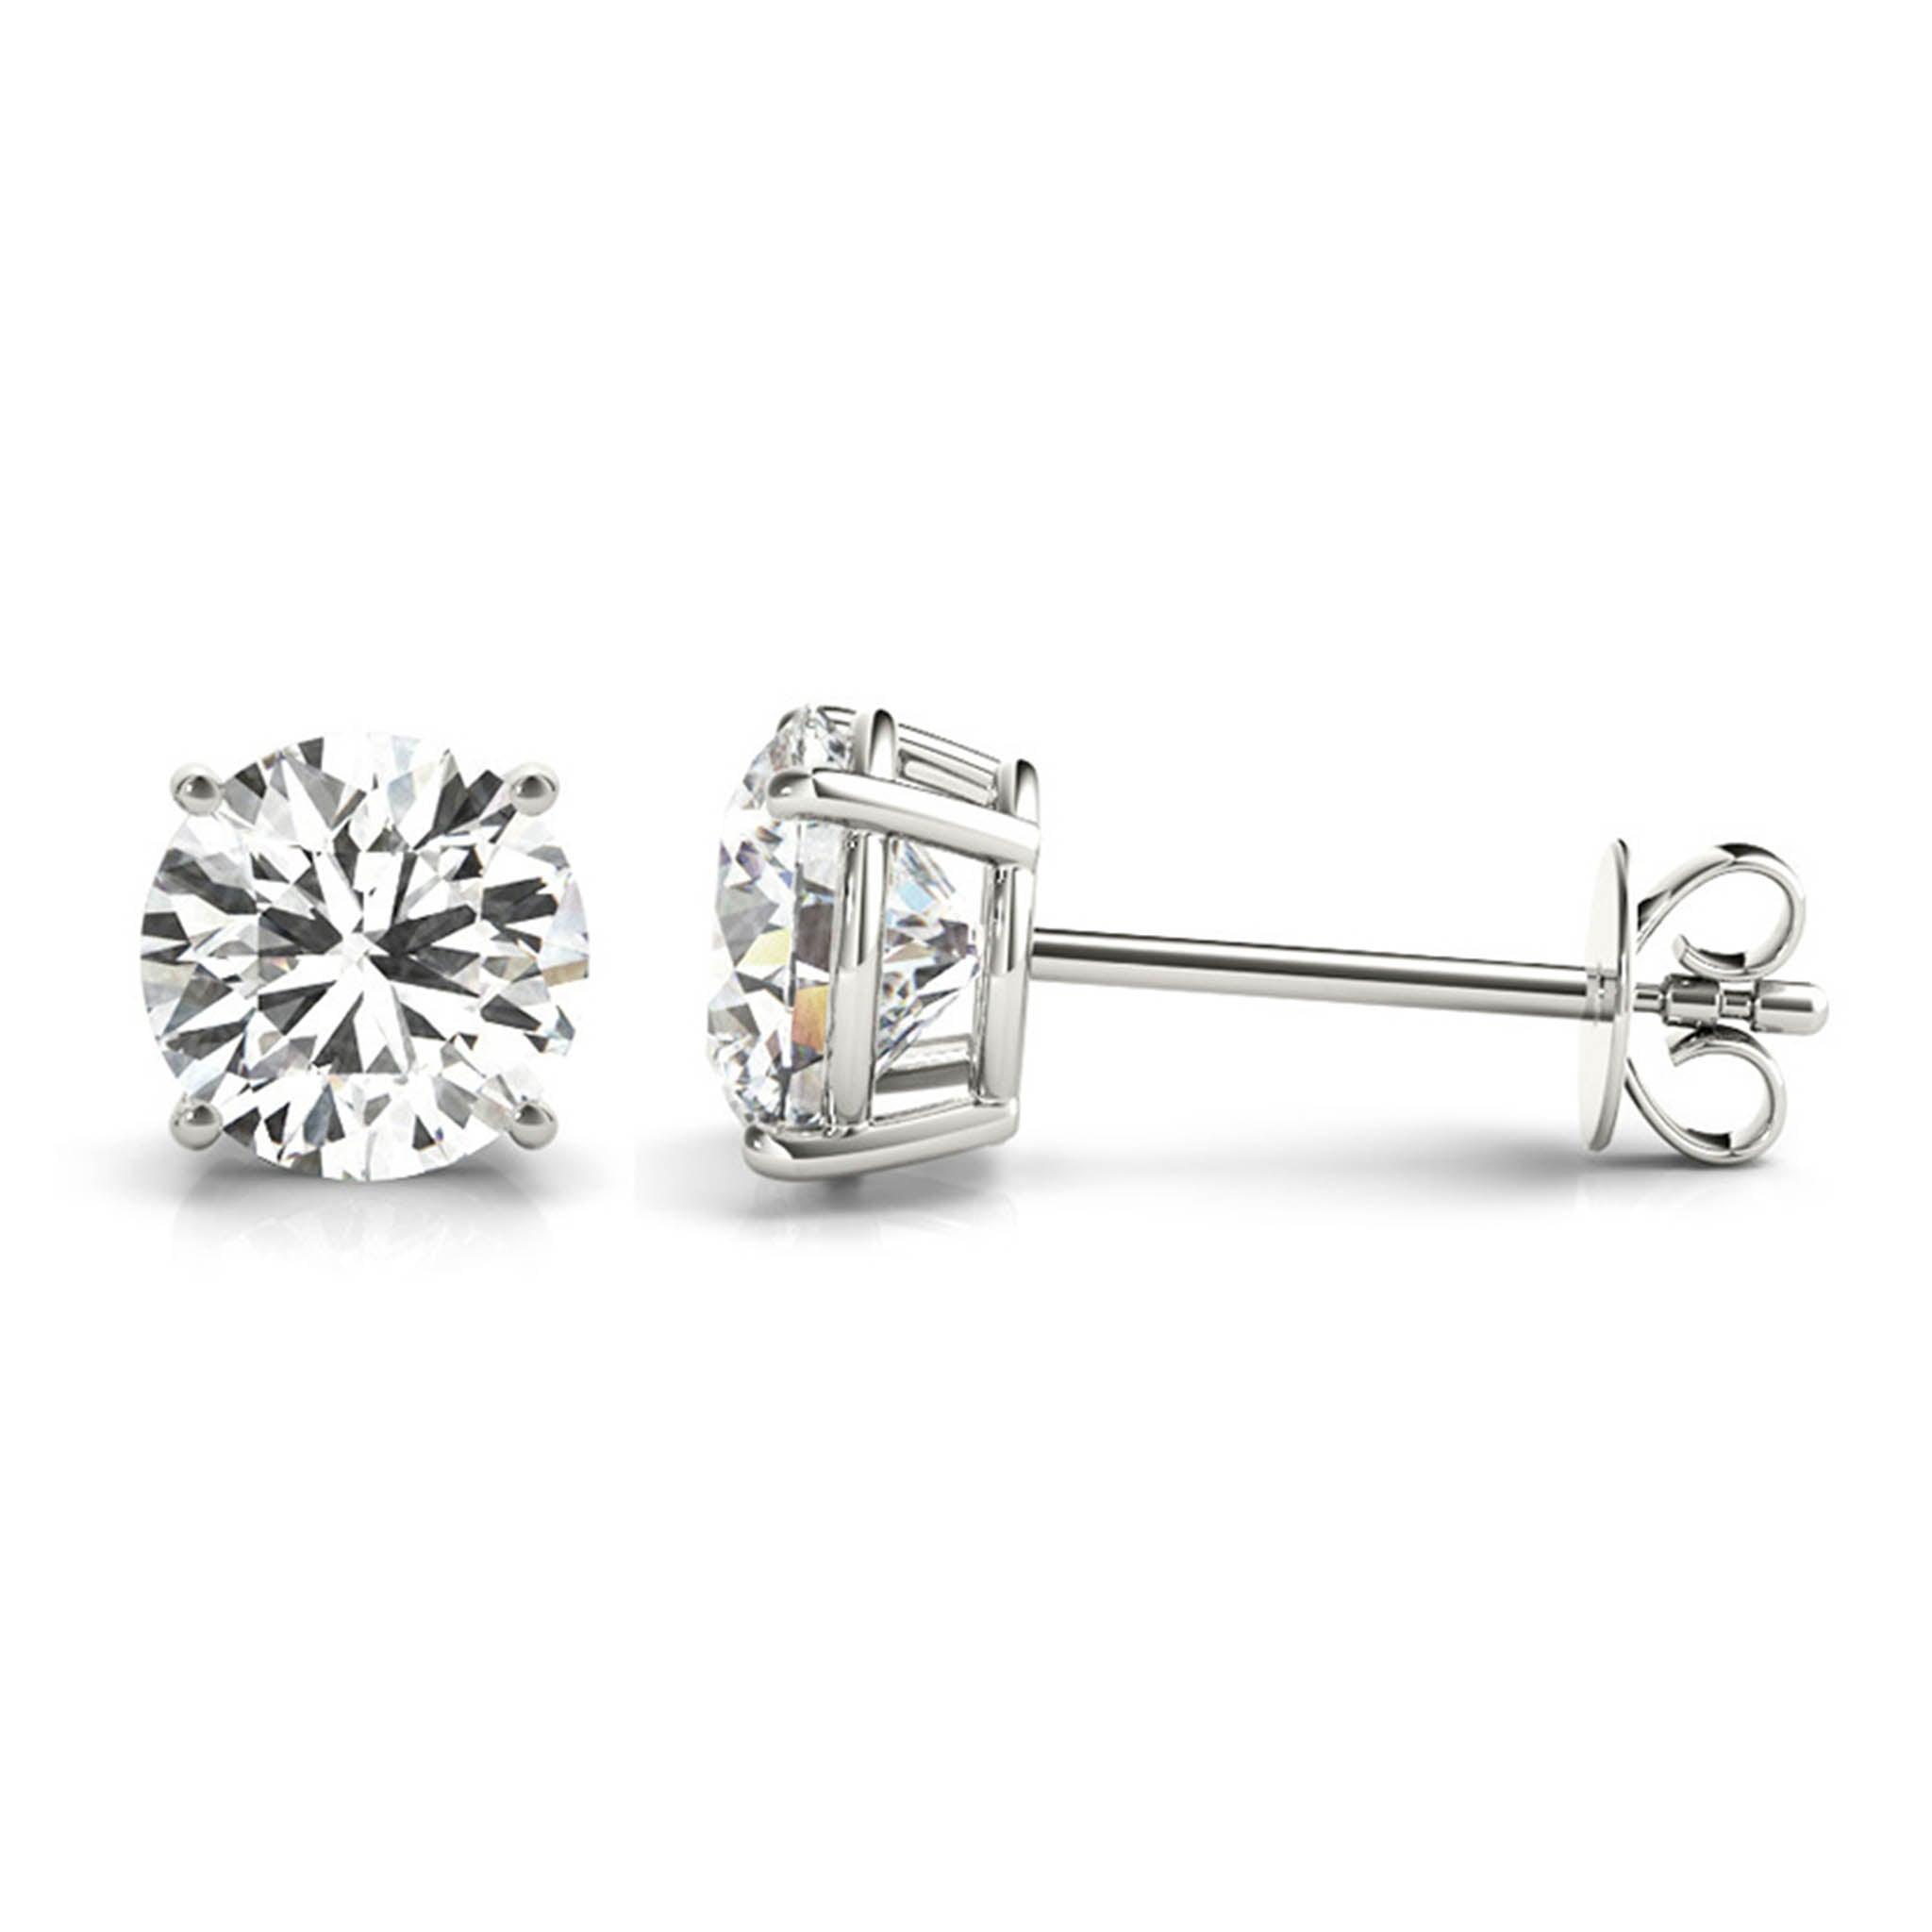 Zoey One Carat Lab Grown Diamond Ear Studs / Earrings.  Total diamond weight 1.00 carats.  4 claw setting. 14ct white gold version. 